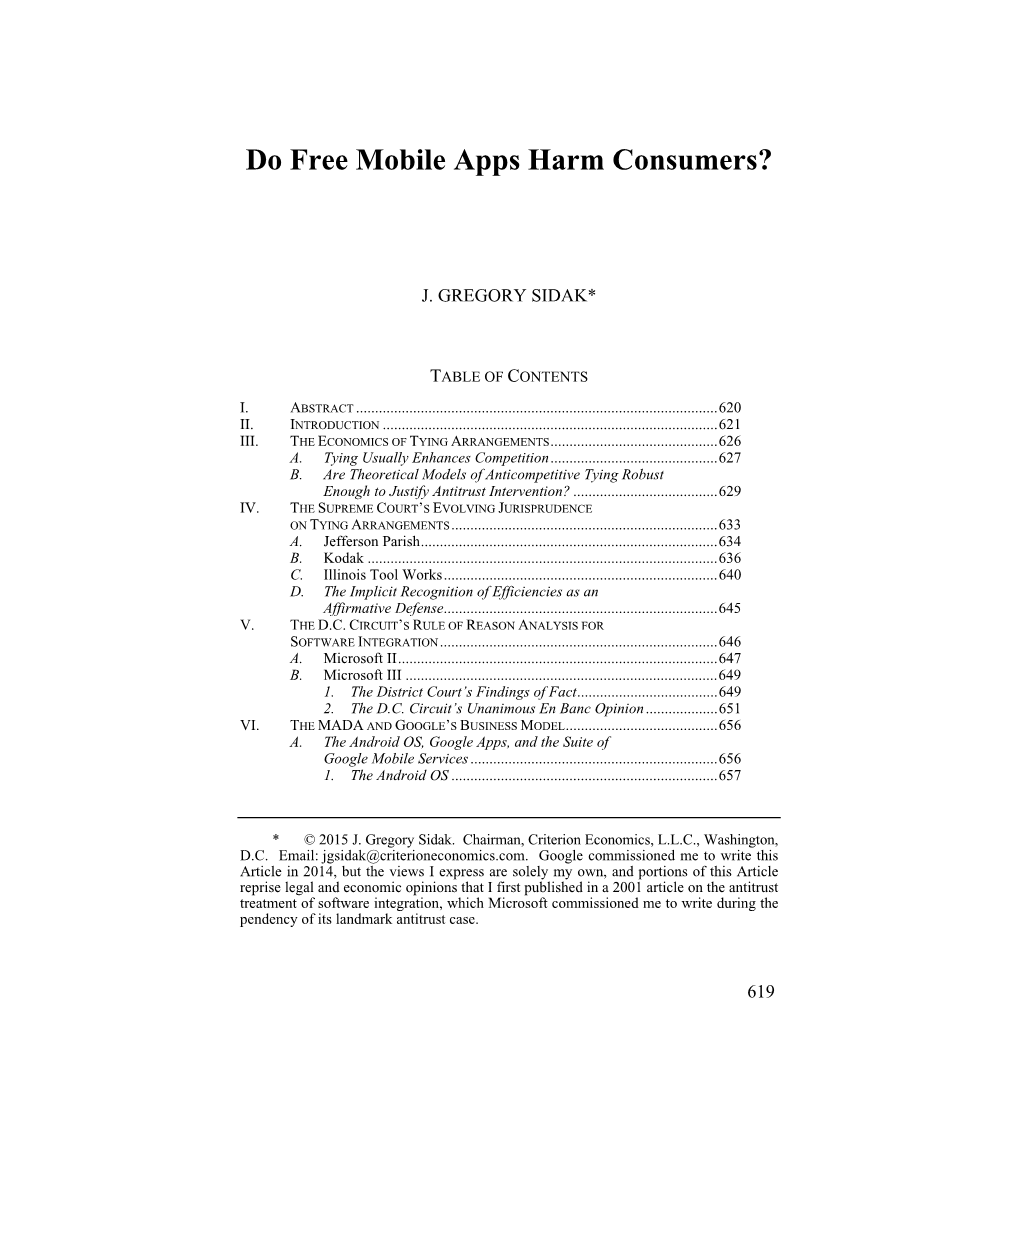 Do Free Mobile Apps Harm Consumers?